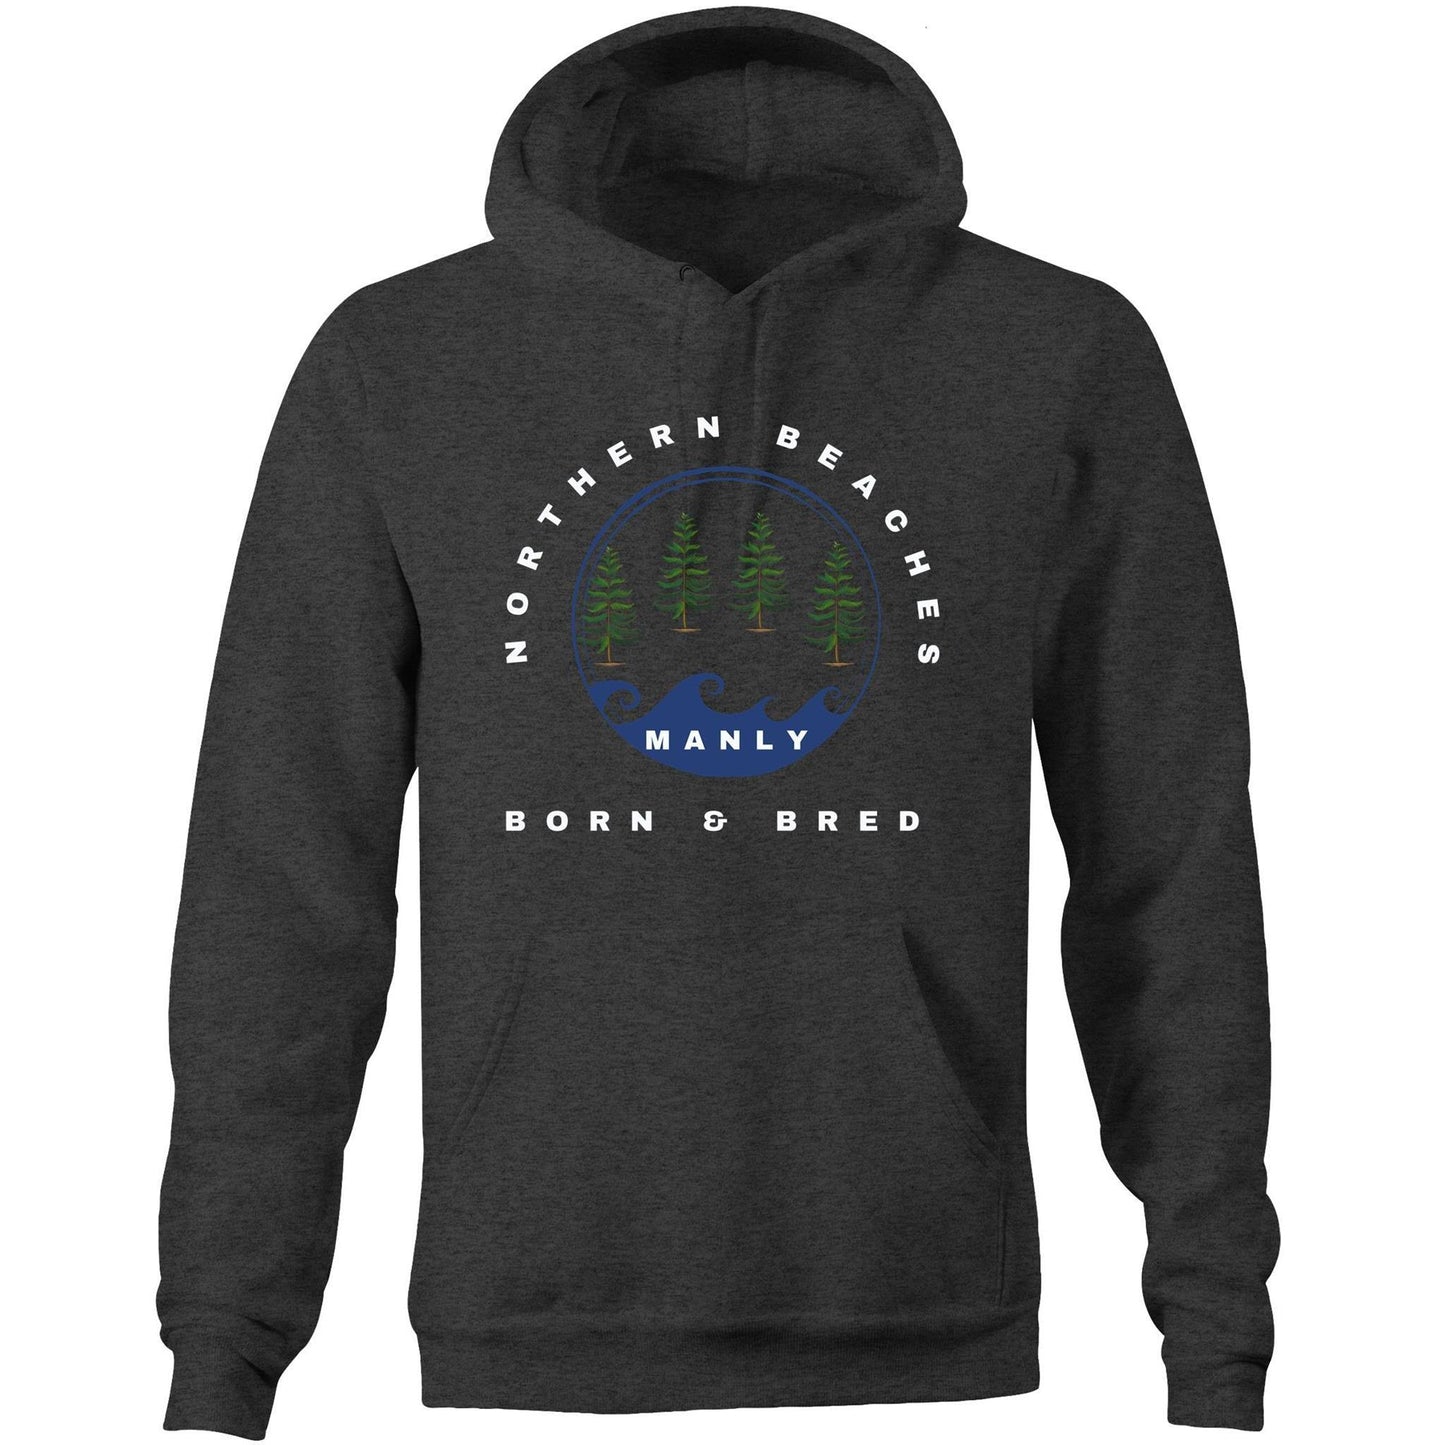 Pocket Hoodie with customised logo design - Lost Manly Shop